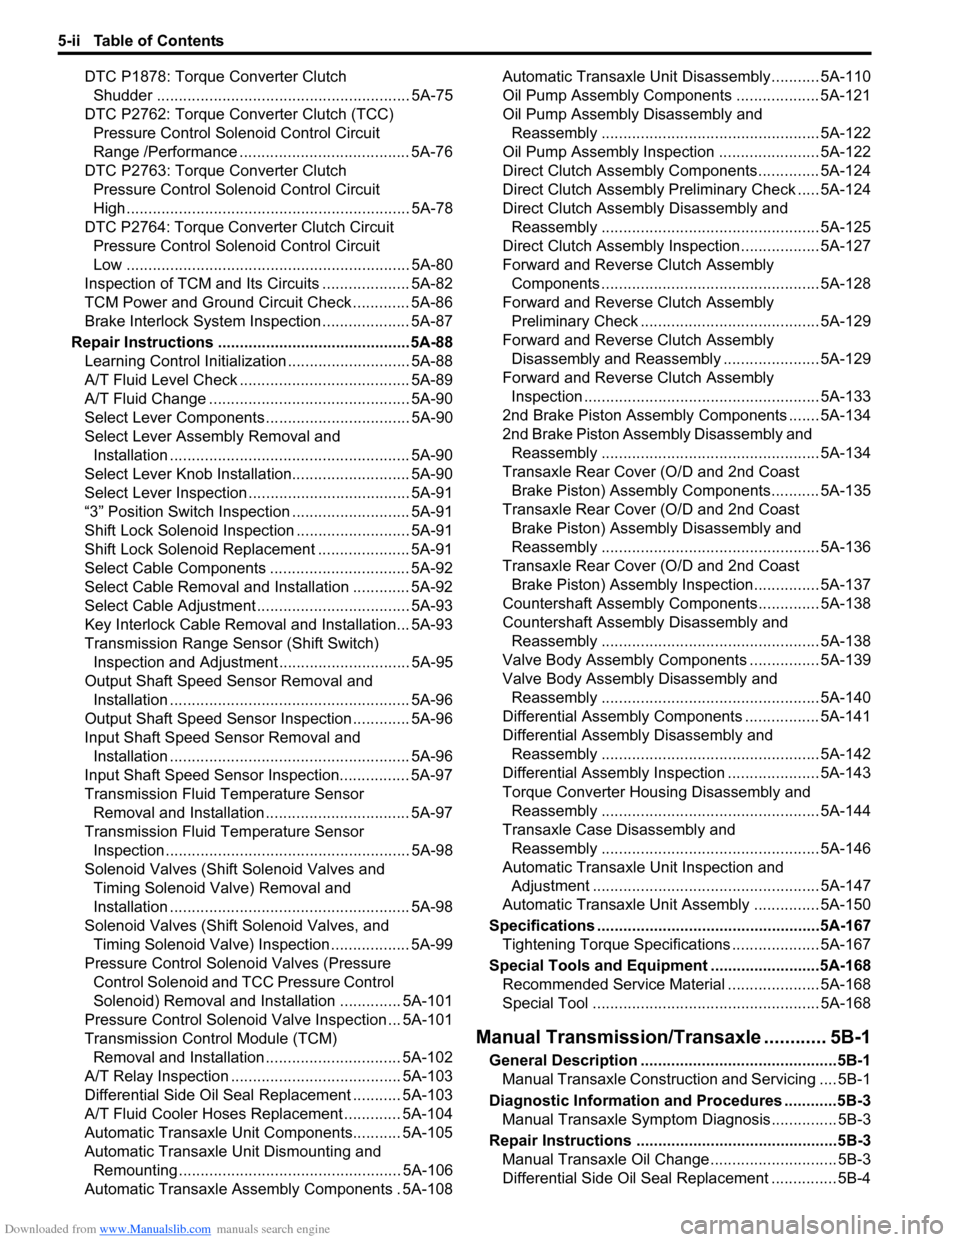 SUZUKI SWIFT 2006 2.G Service Workshop Manual Downloaded from www.Manualslib.com manuals search engine 5-ii Table of Contents
DTC P1878: Torque Converter Clutch Shudder .......................................................... 5A-75
DTC P2762: T